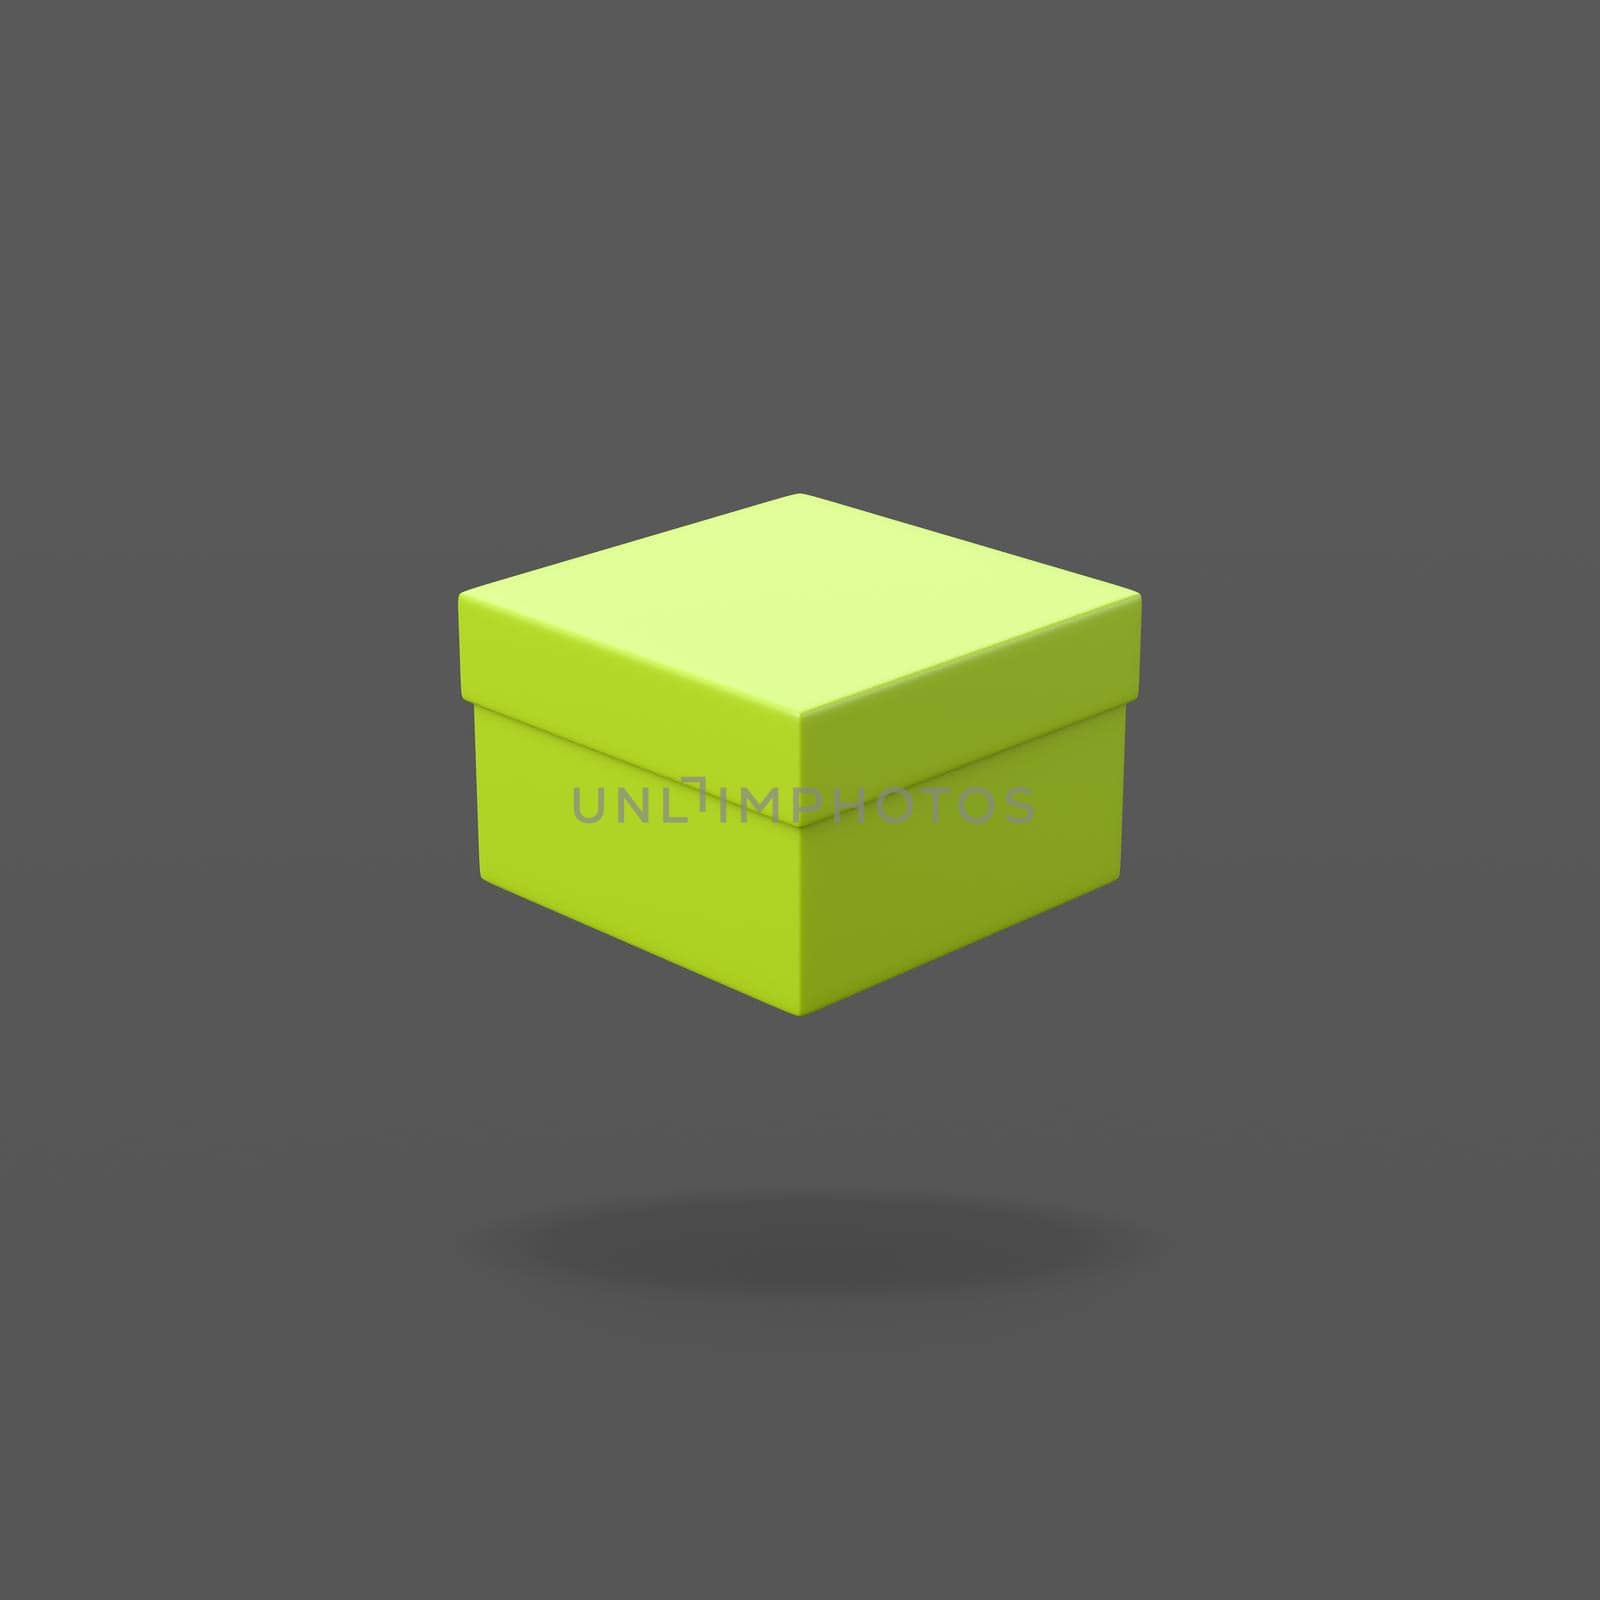 Closed Green Box with Cover on Flat Black Background with Shadow 3D Illustration